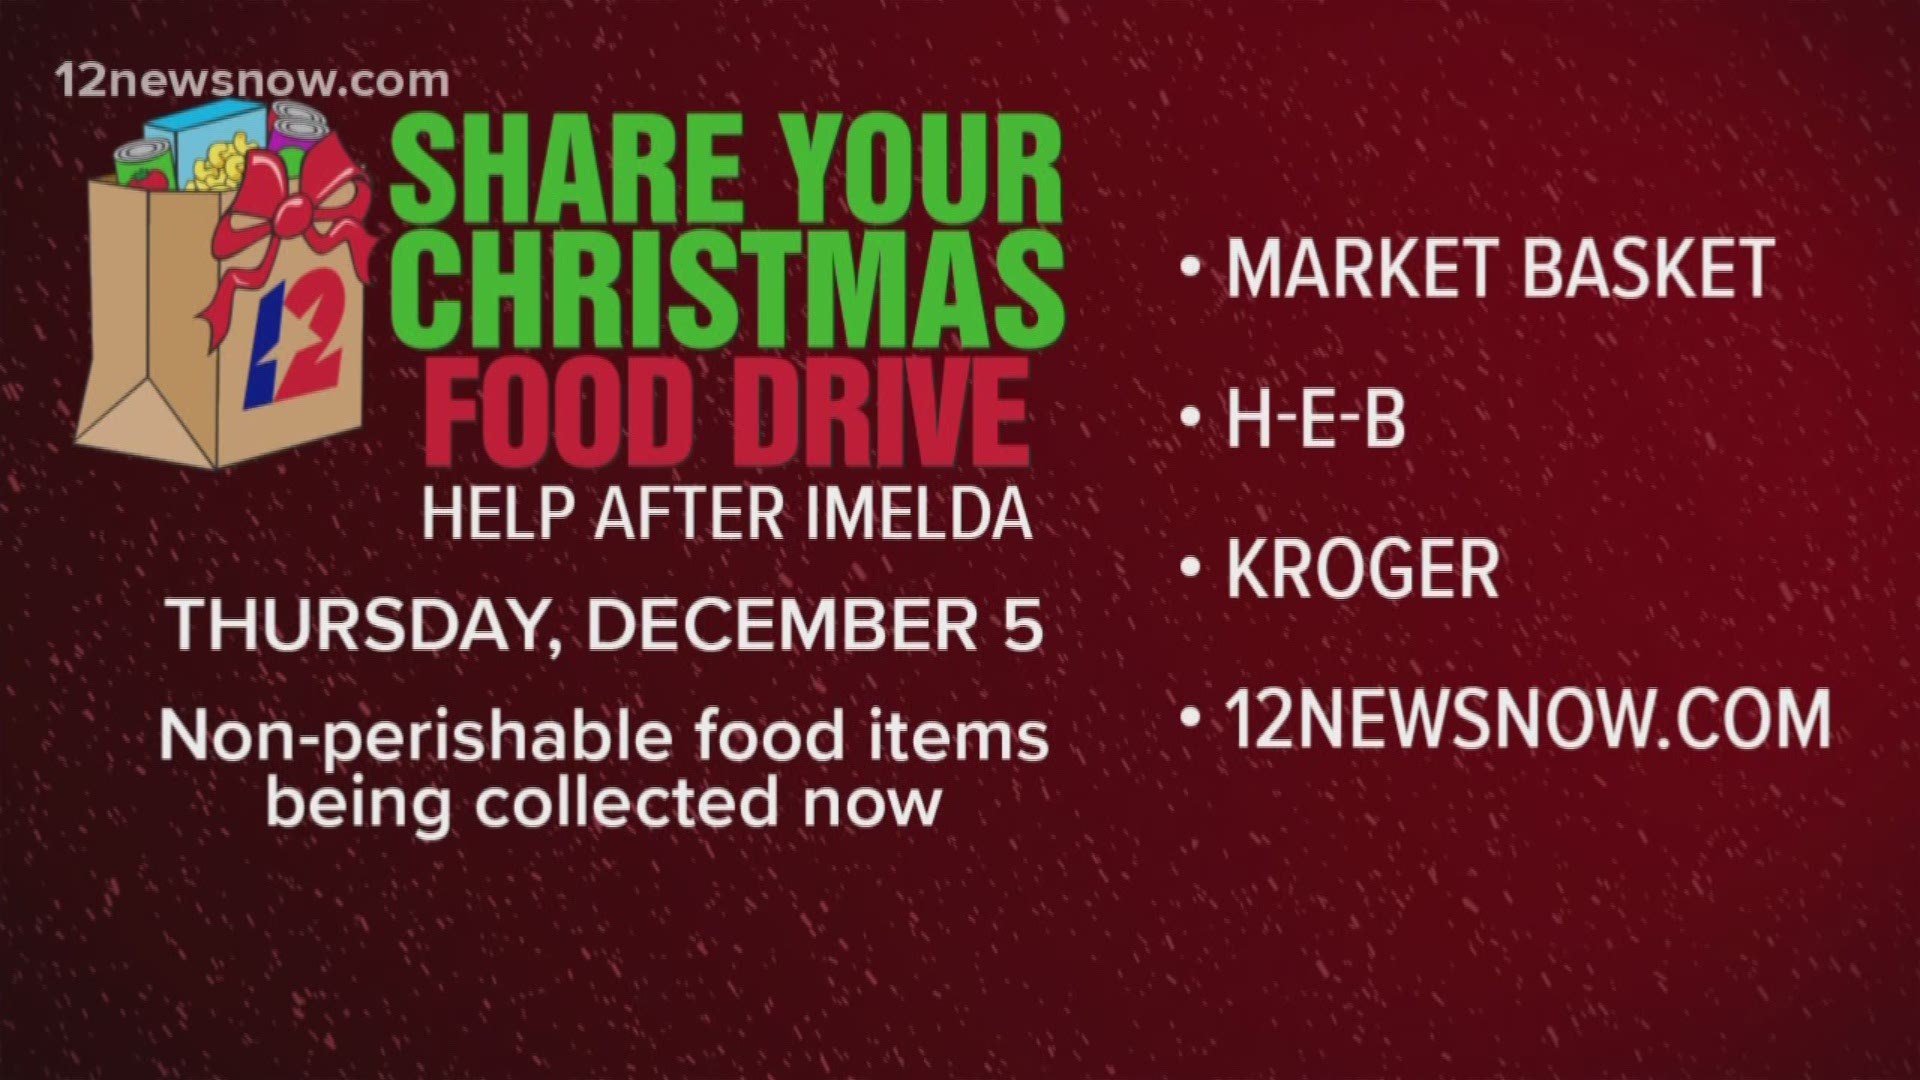 Help after Imelda at the 25th Annual Share your Christmas Food Drive. Meet 12News anchors at Market Basket, H-E-B, and Kroger around the SETX area.